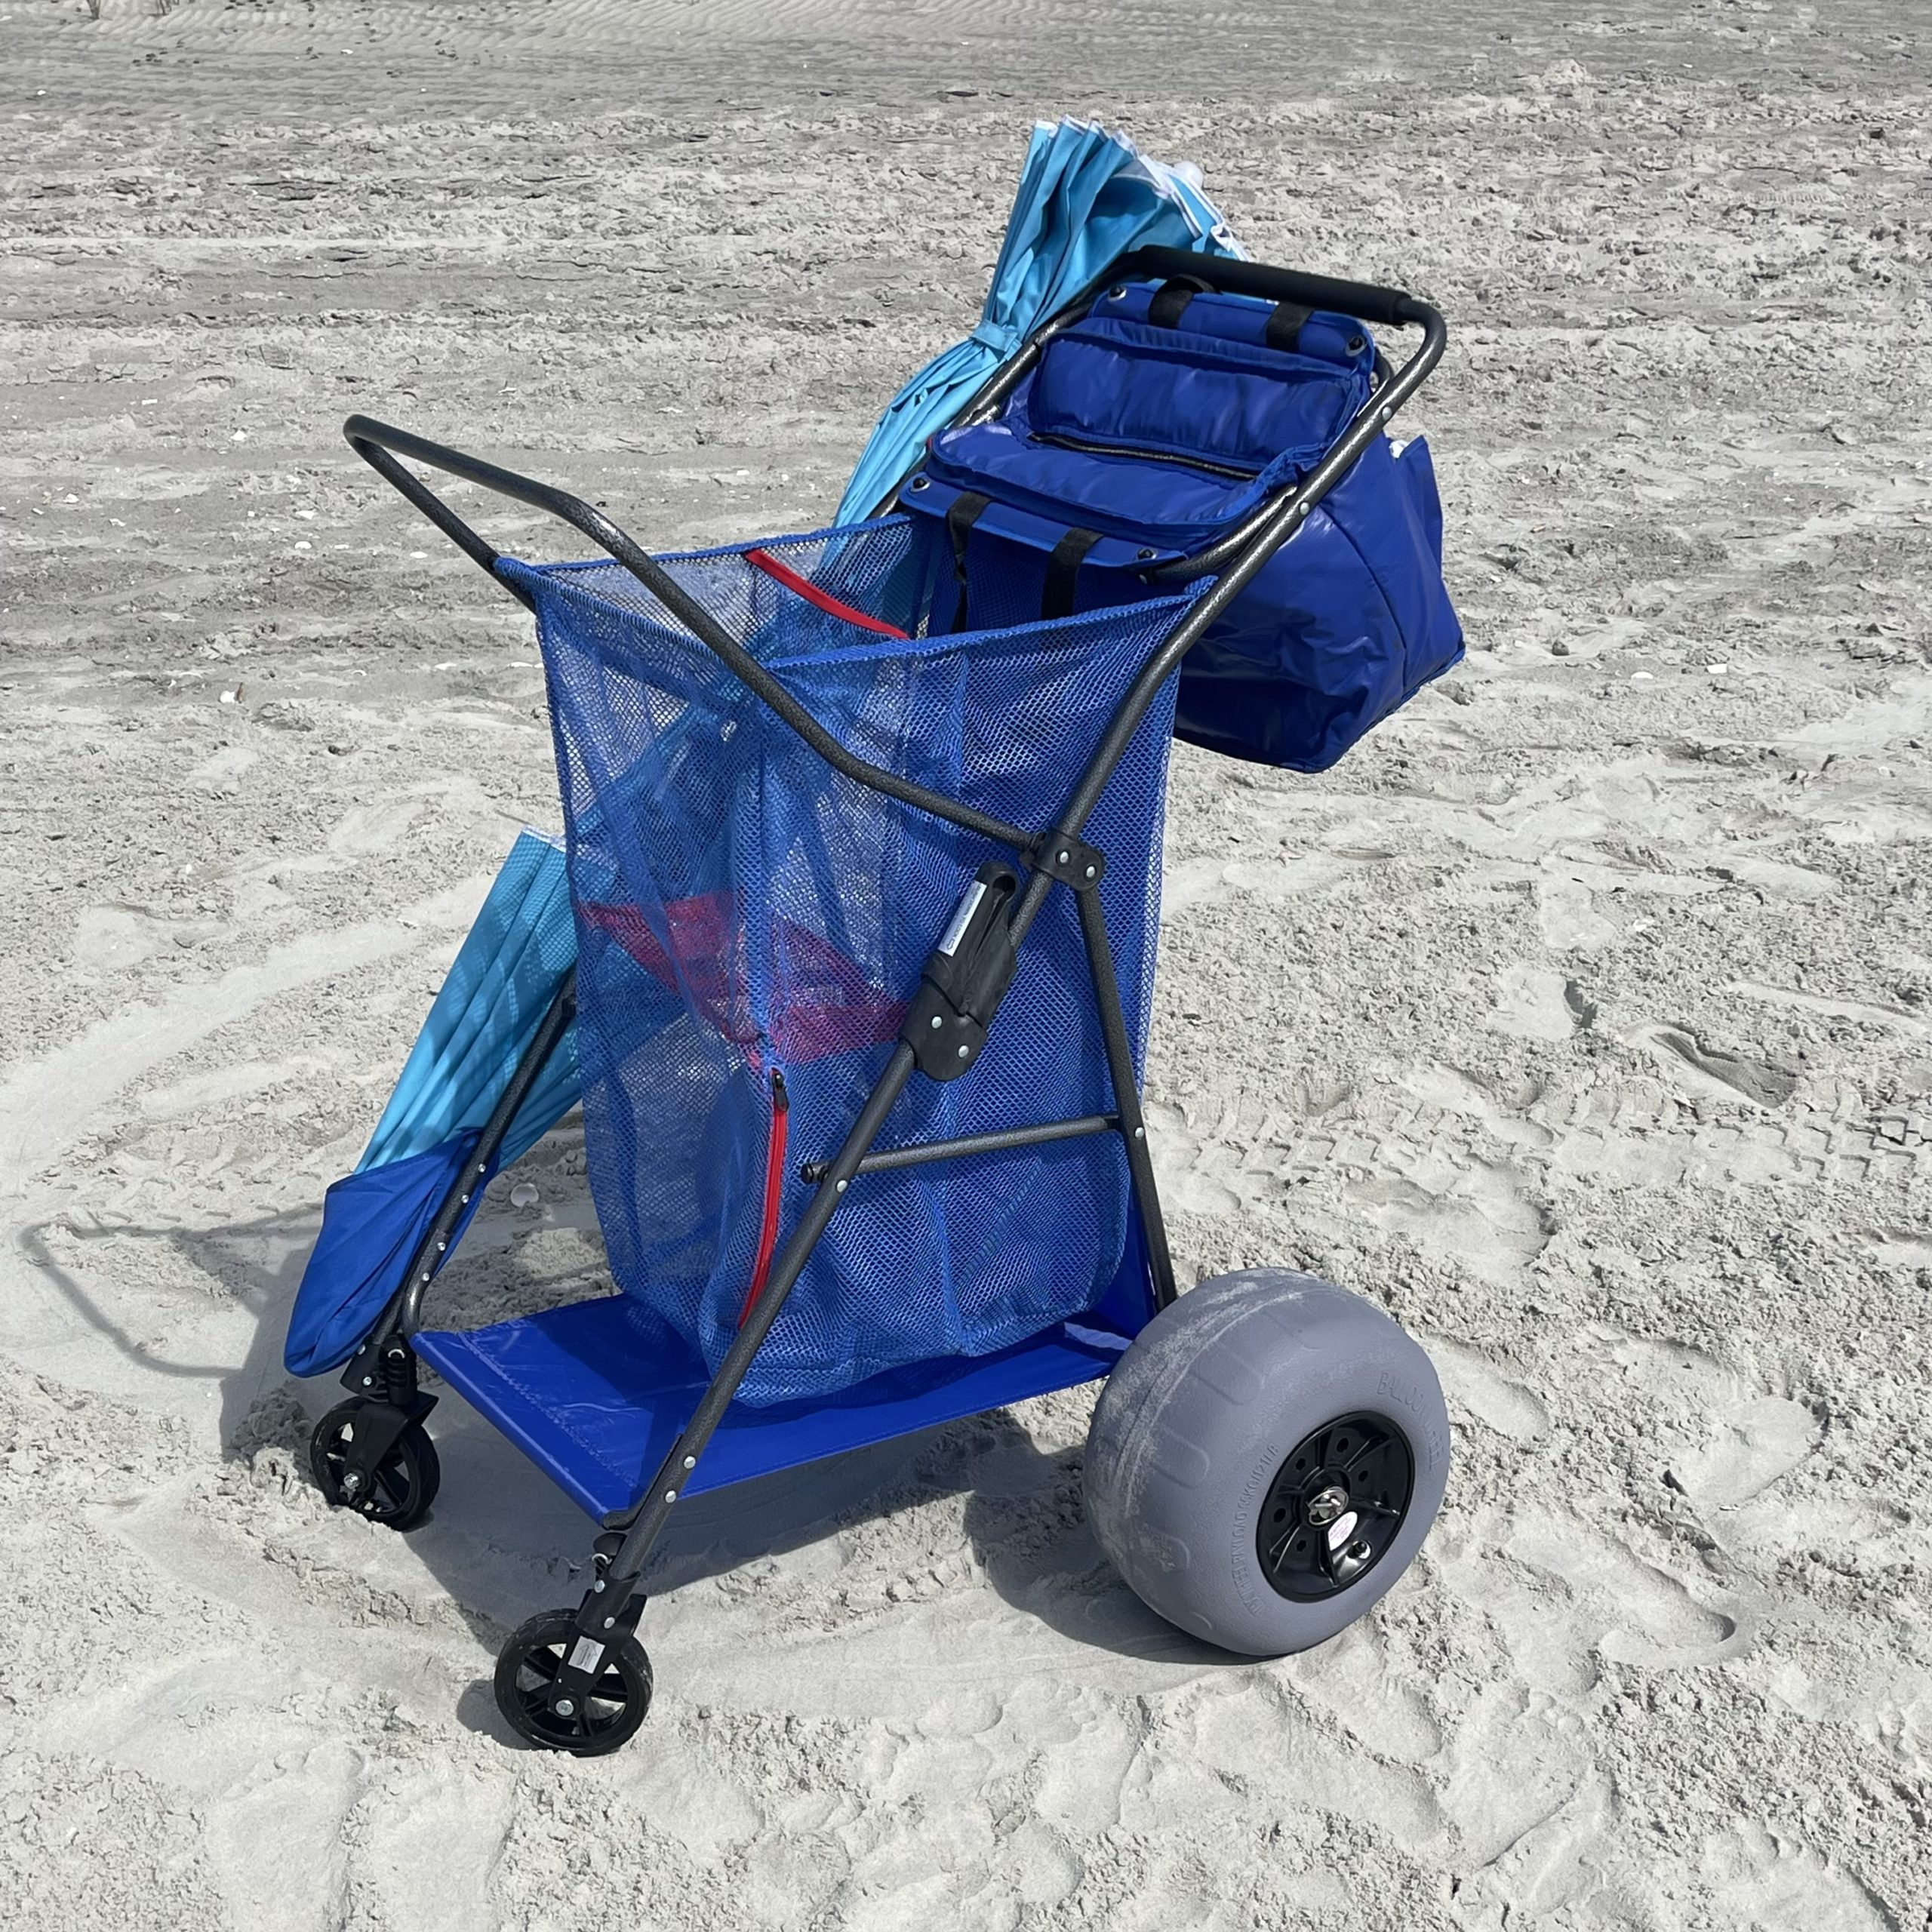 Folding Beach Cart with Balloon Wheels Tires for Sand Heavy Duty Cooler  Dolly